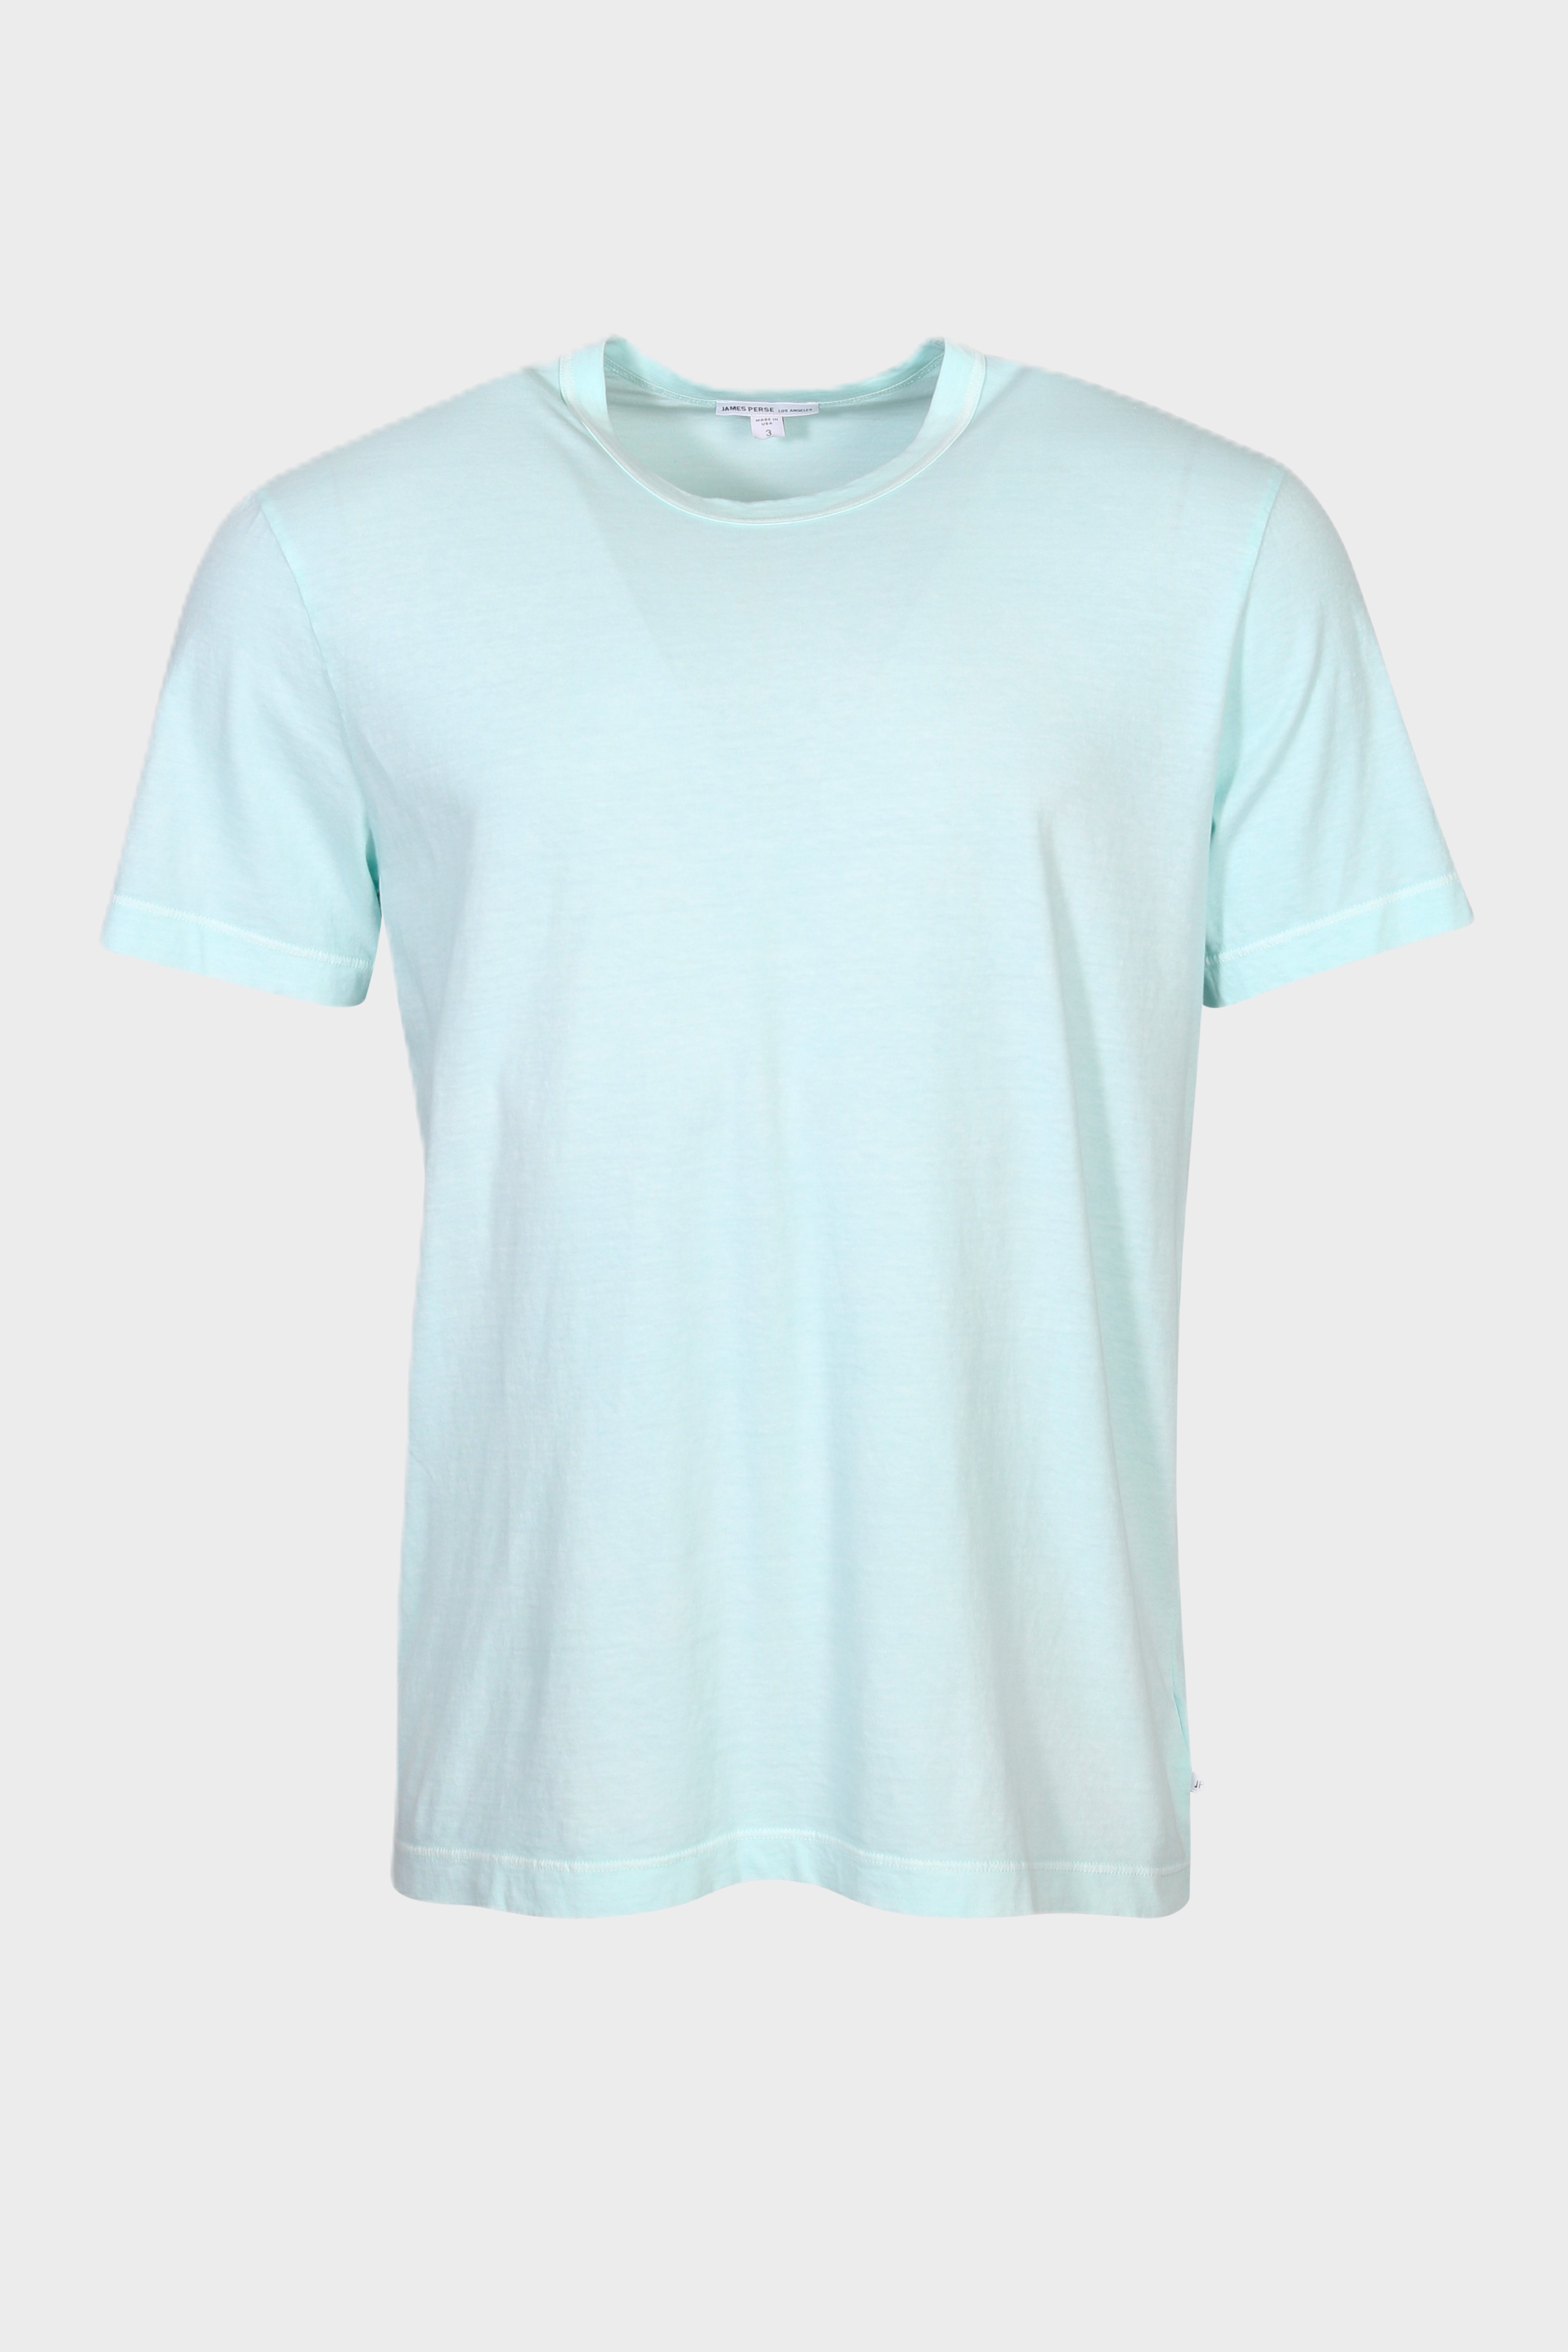 JAMES PERSE Crewneck T-Shirt in Washed Light Blue